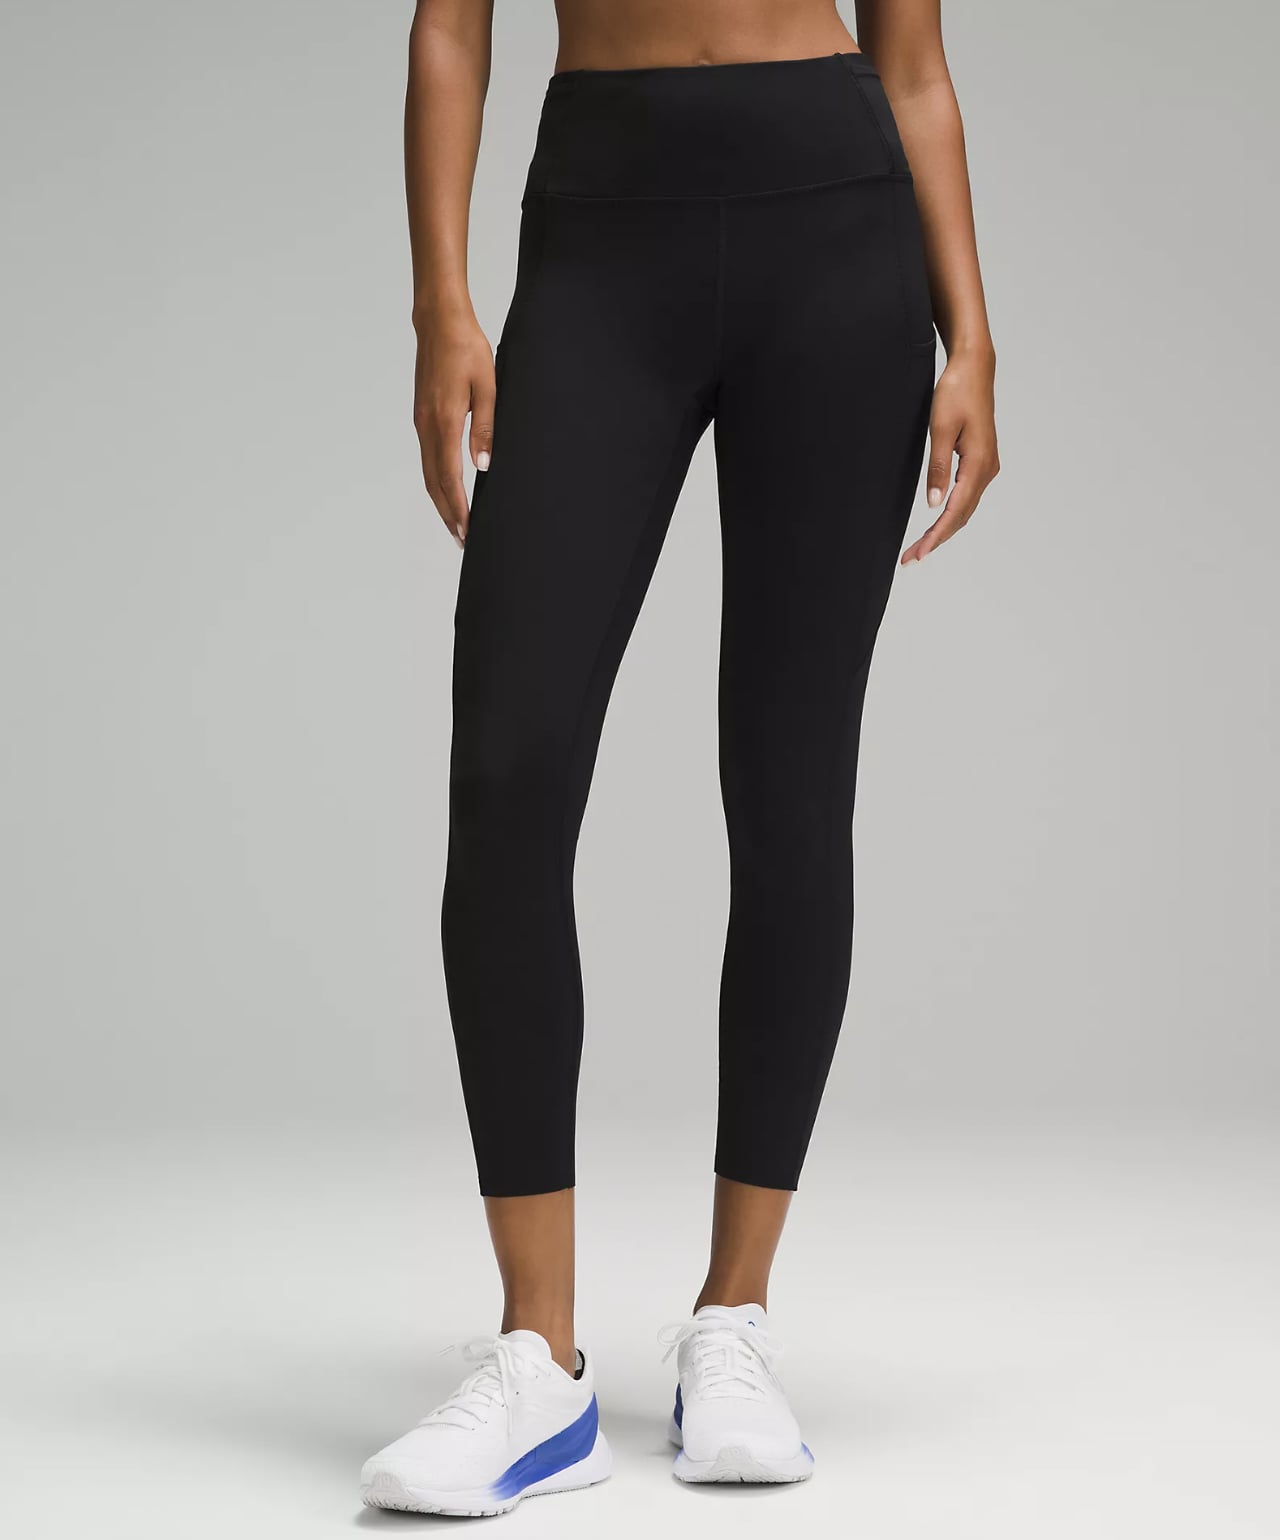 These Lululemon leggings are 'a win for curvy girls' — and they're